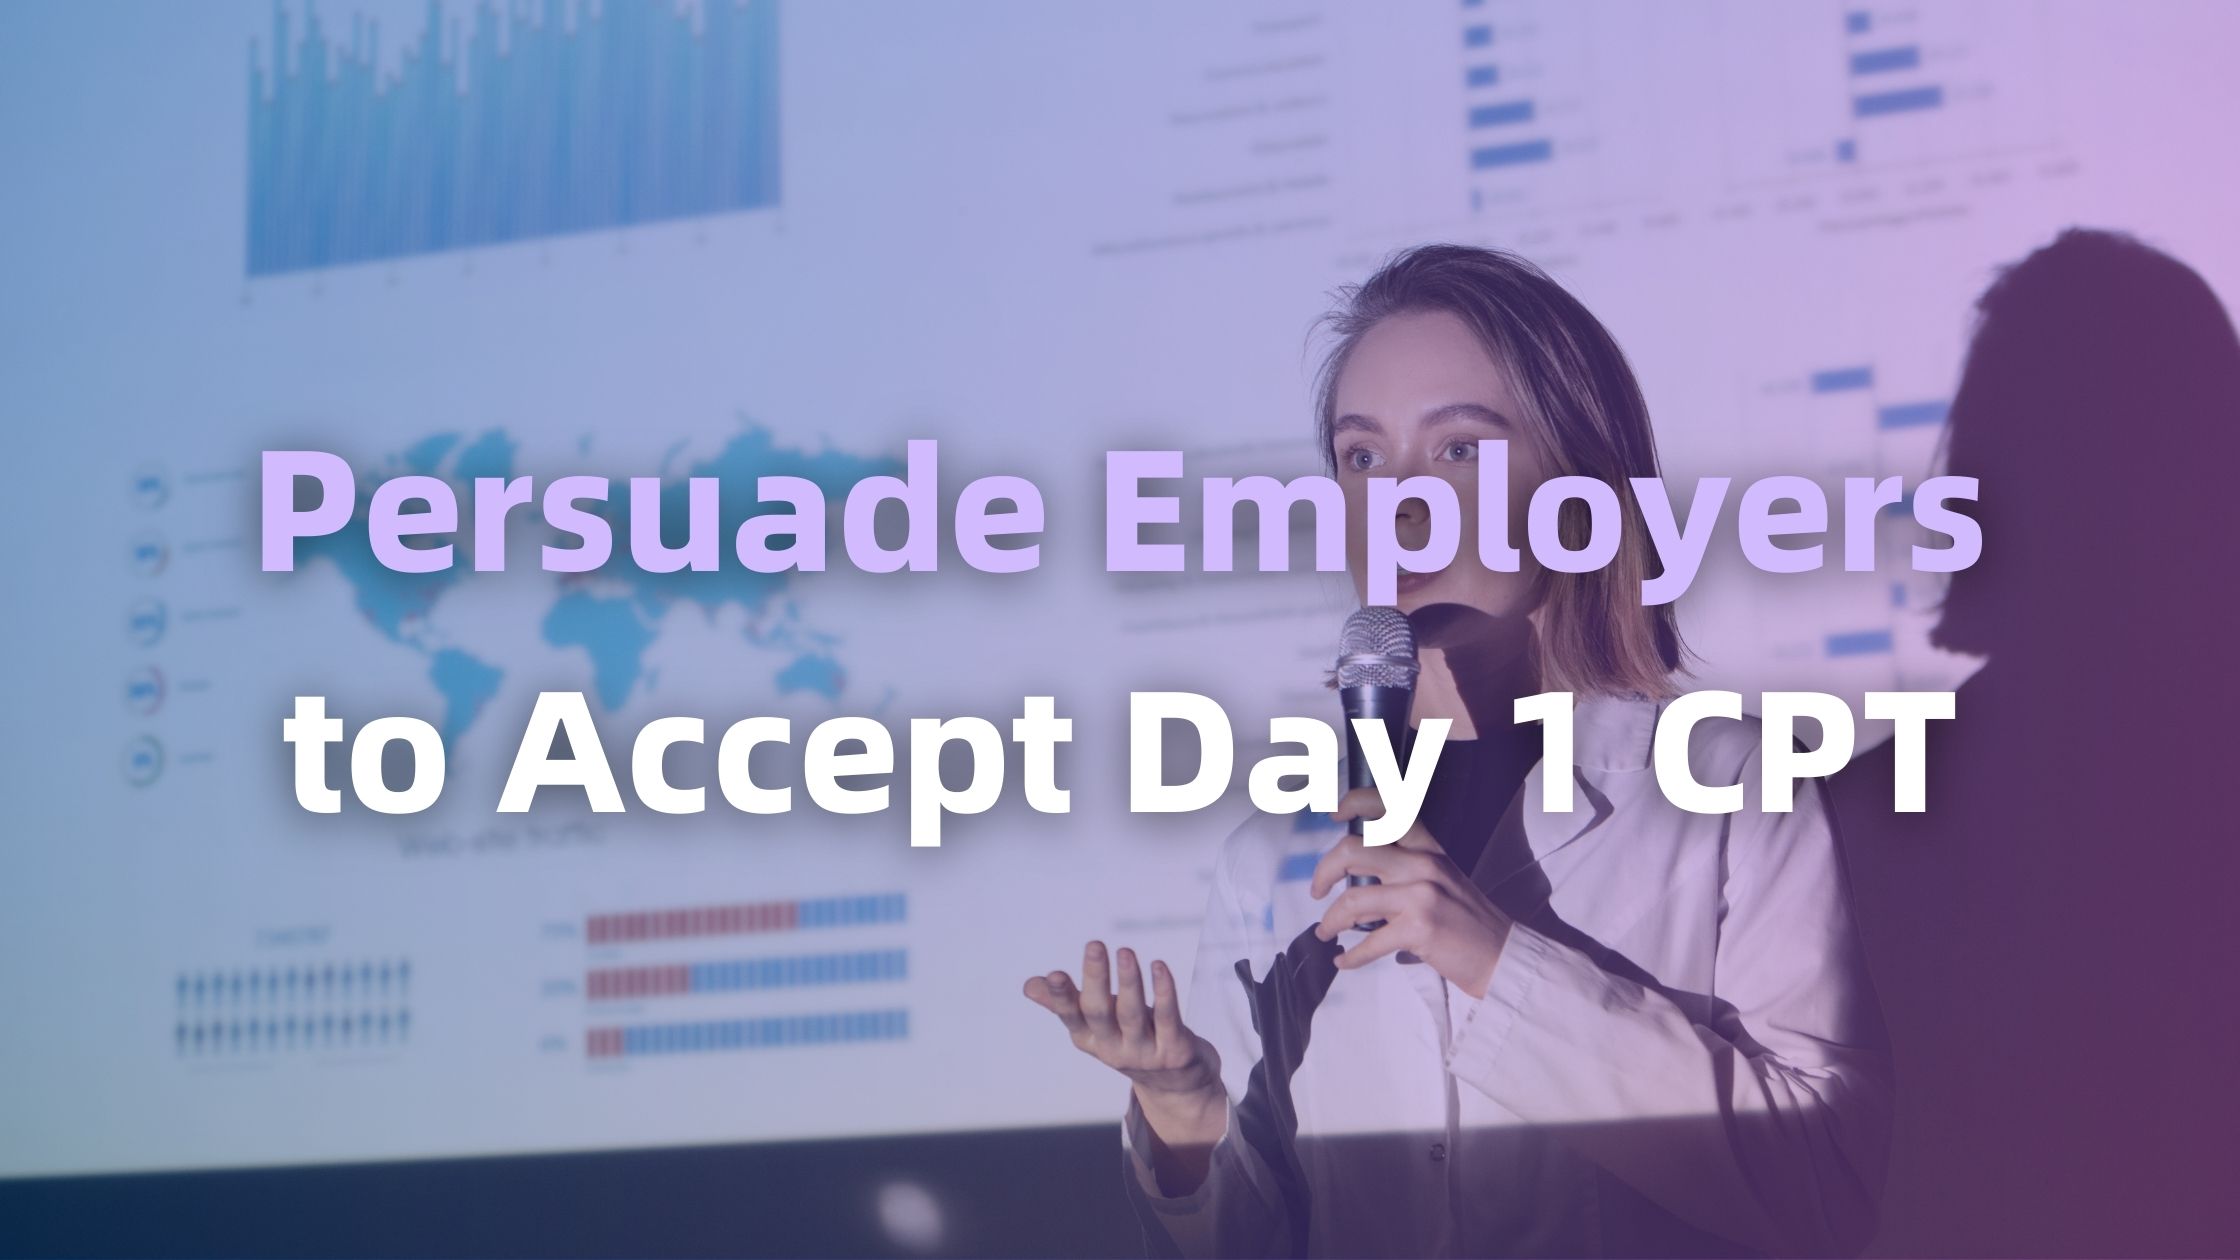 Persuade Employers to Accept Day 1 CPT